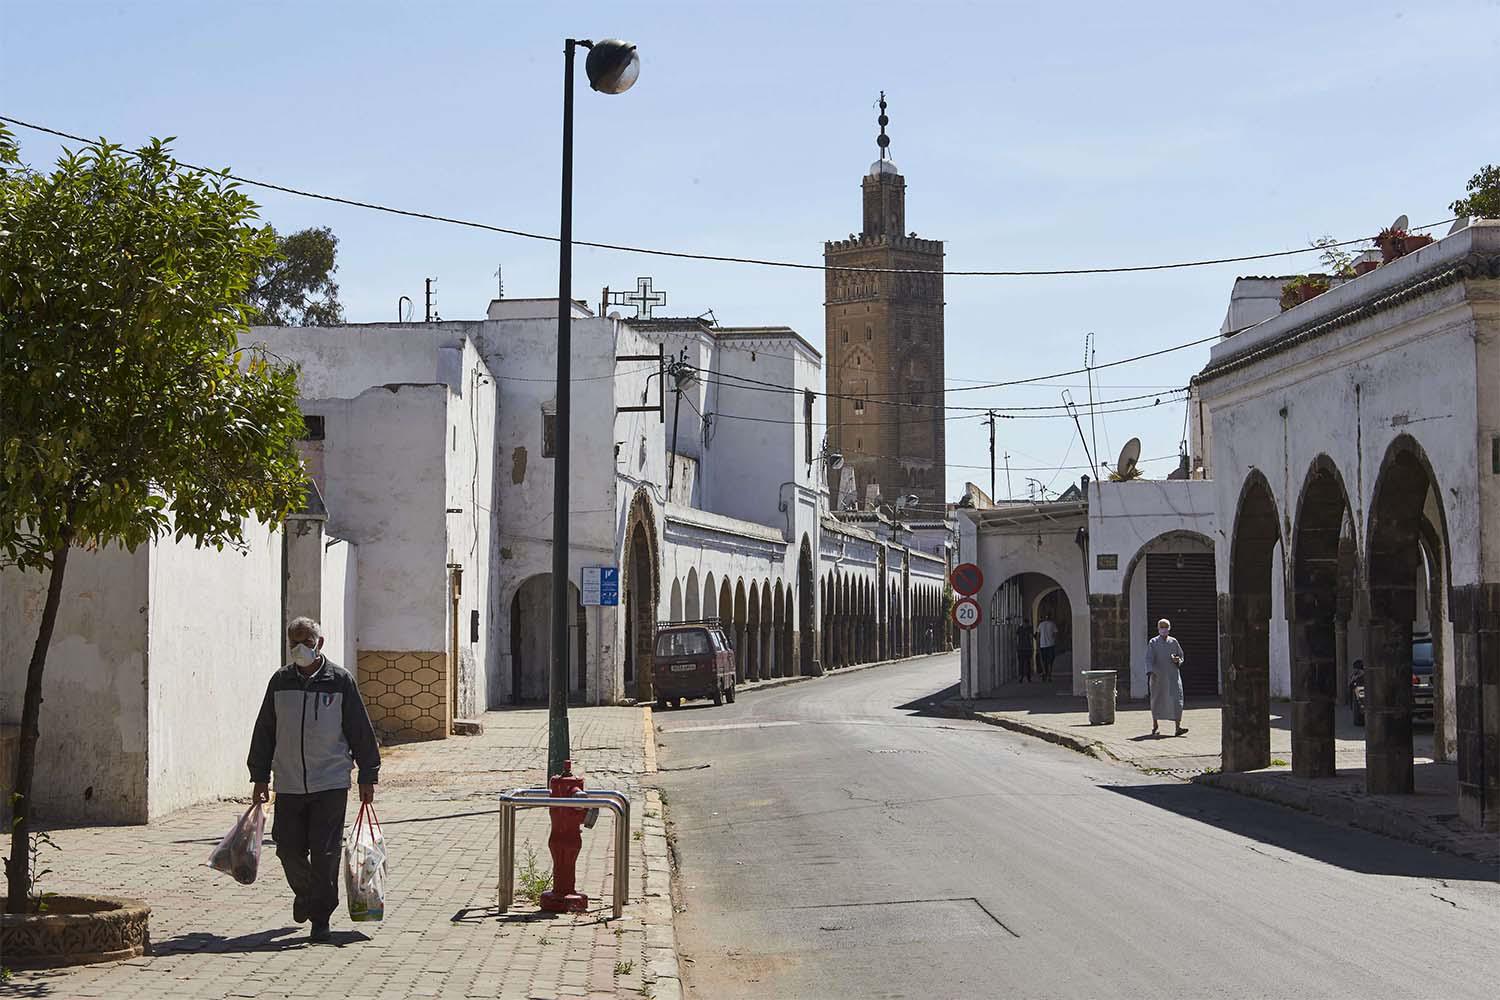 A man leaves one of the markets in the old Habous district of Casablanca